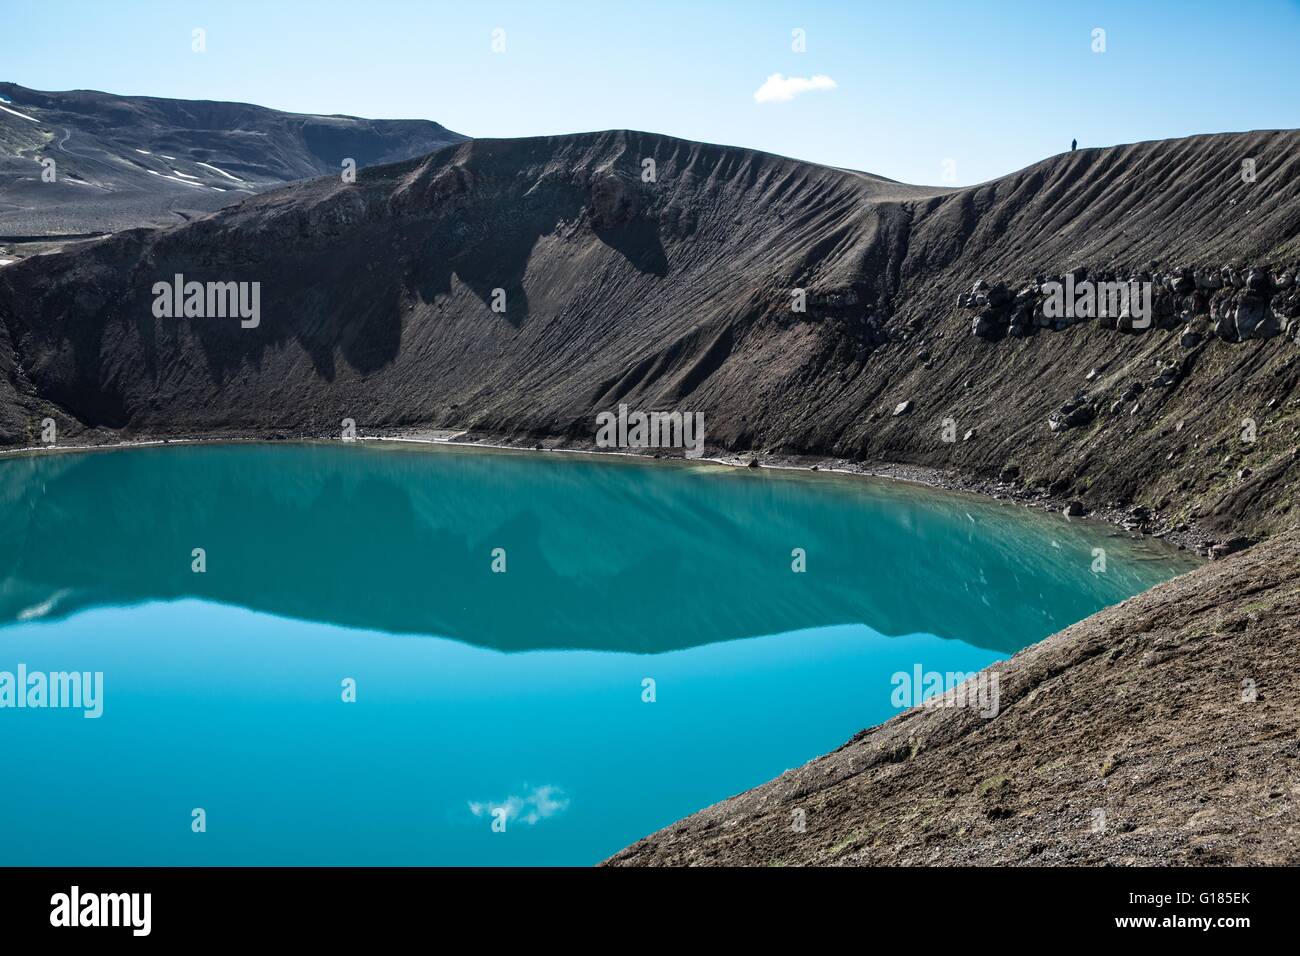 Elevated view of blue water in Viti crater lake, Krafla, Iceland Stock Photo